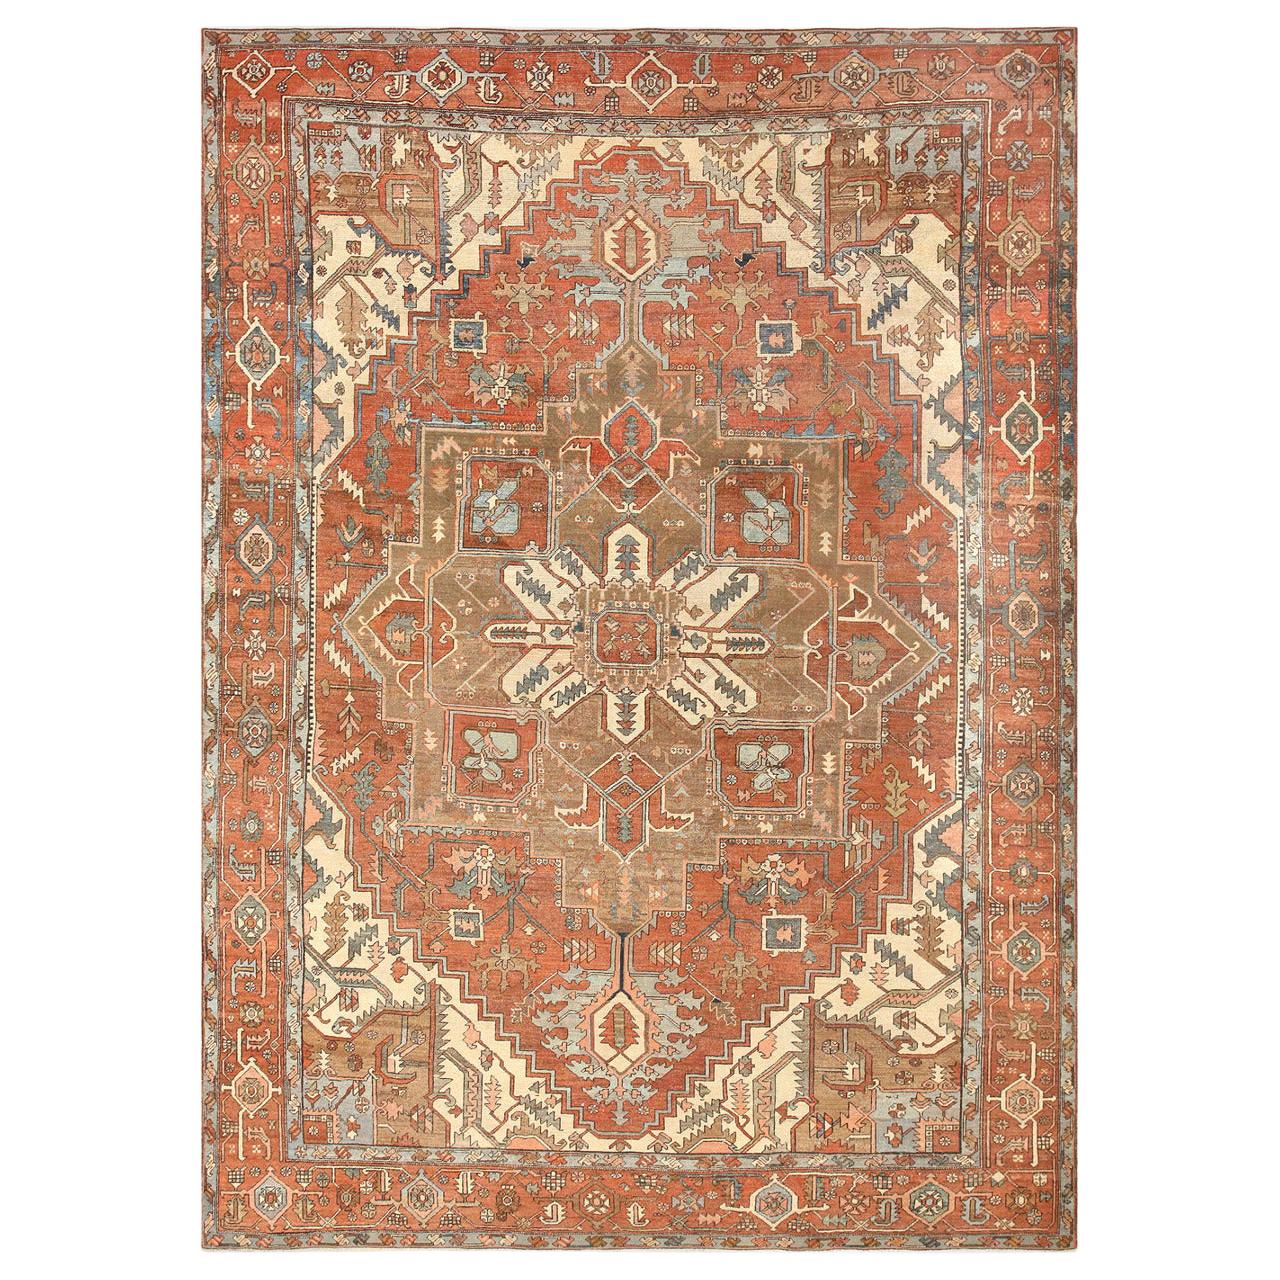 Room Sized Antique Persian Serapi Carpet. Size: 9 ft 9 in x 12 ft 10 in